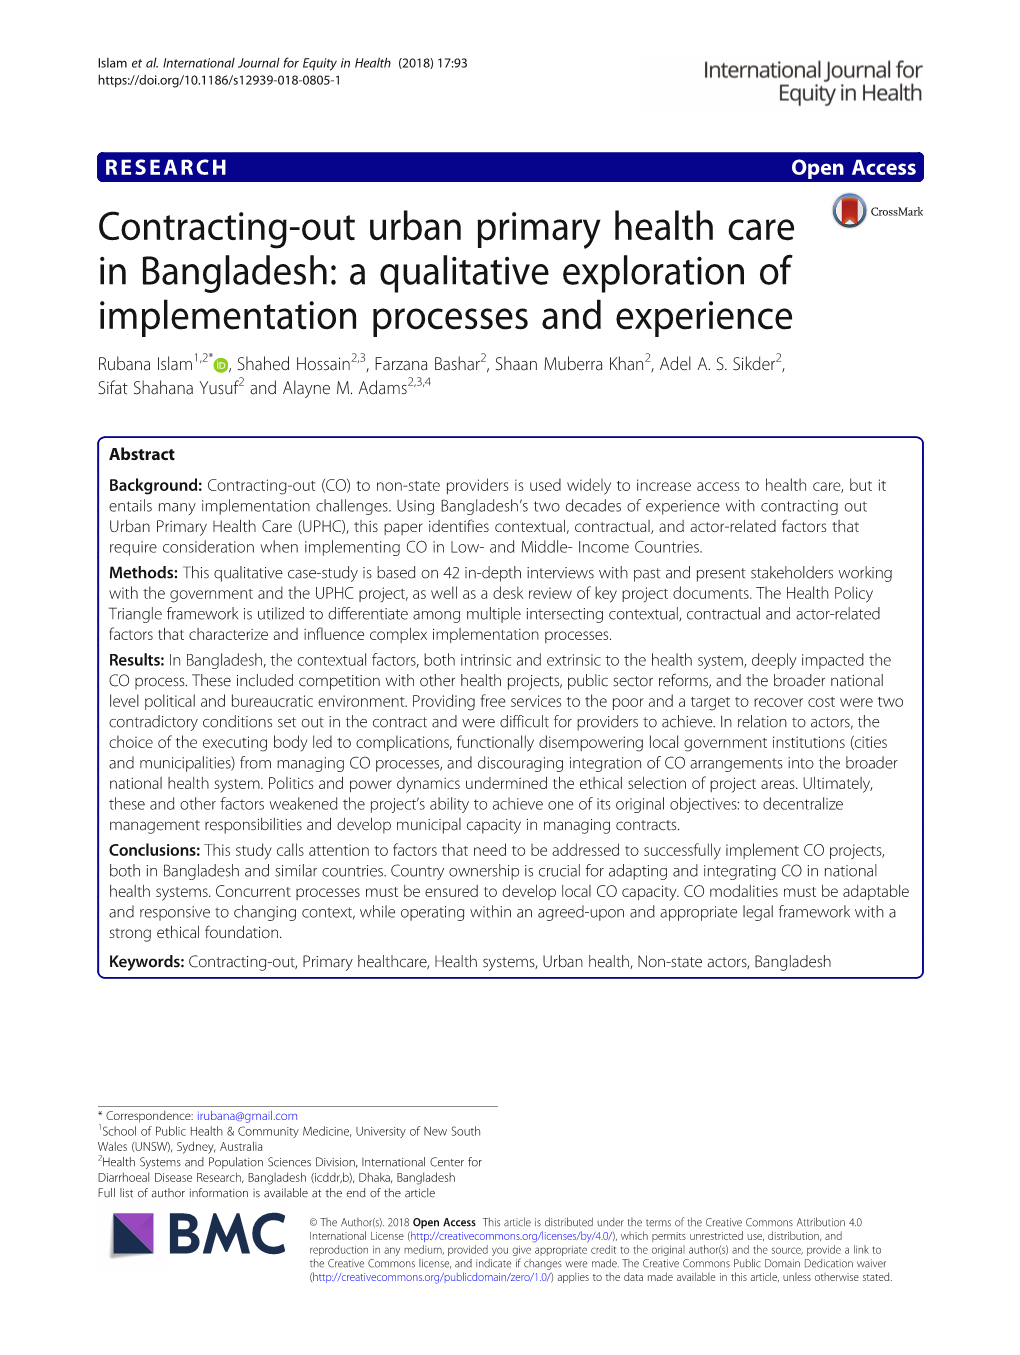 Contracting-Out Urban Primary Health Care in Bangladesh